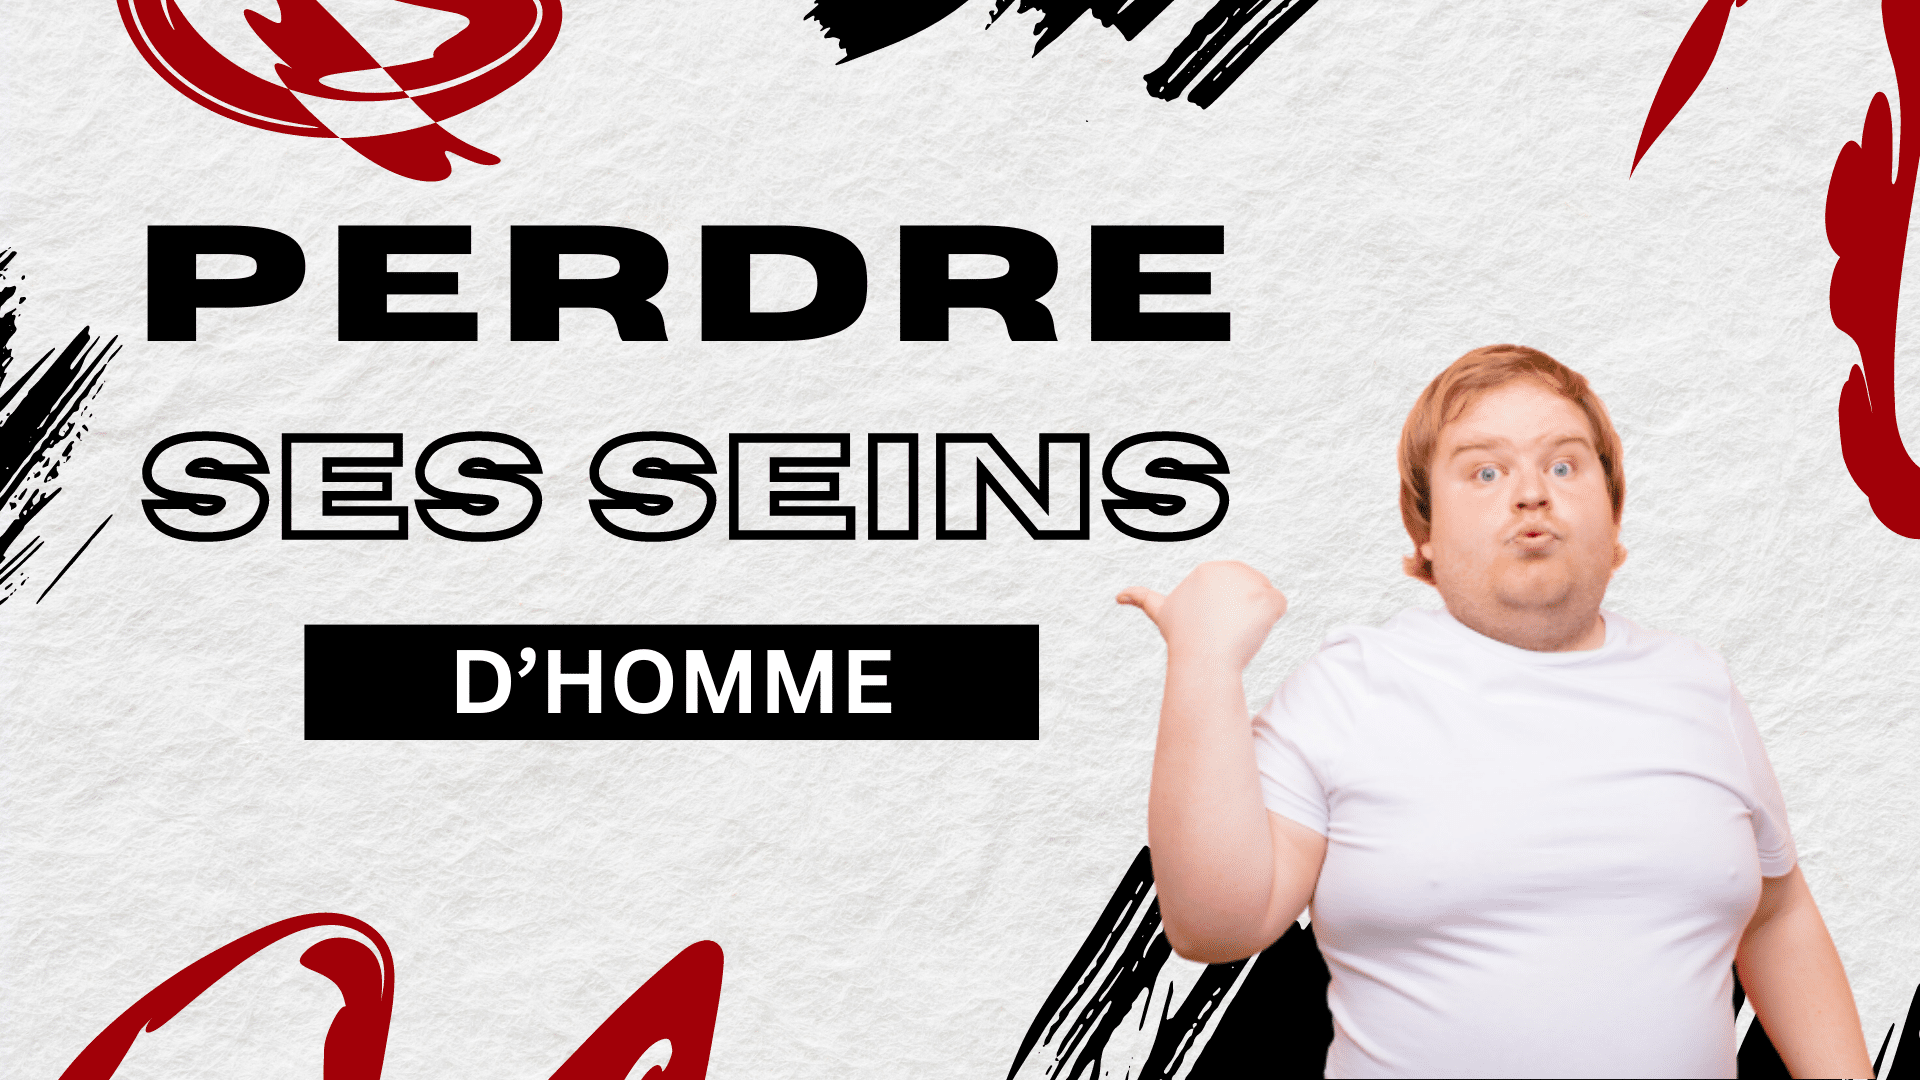 perdre ses seins dhomme